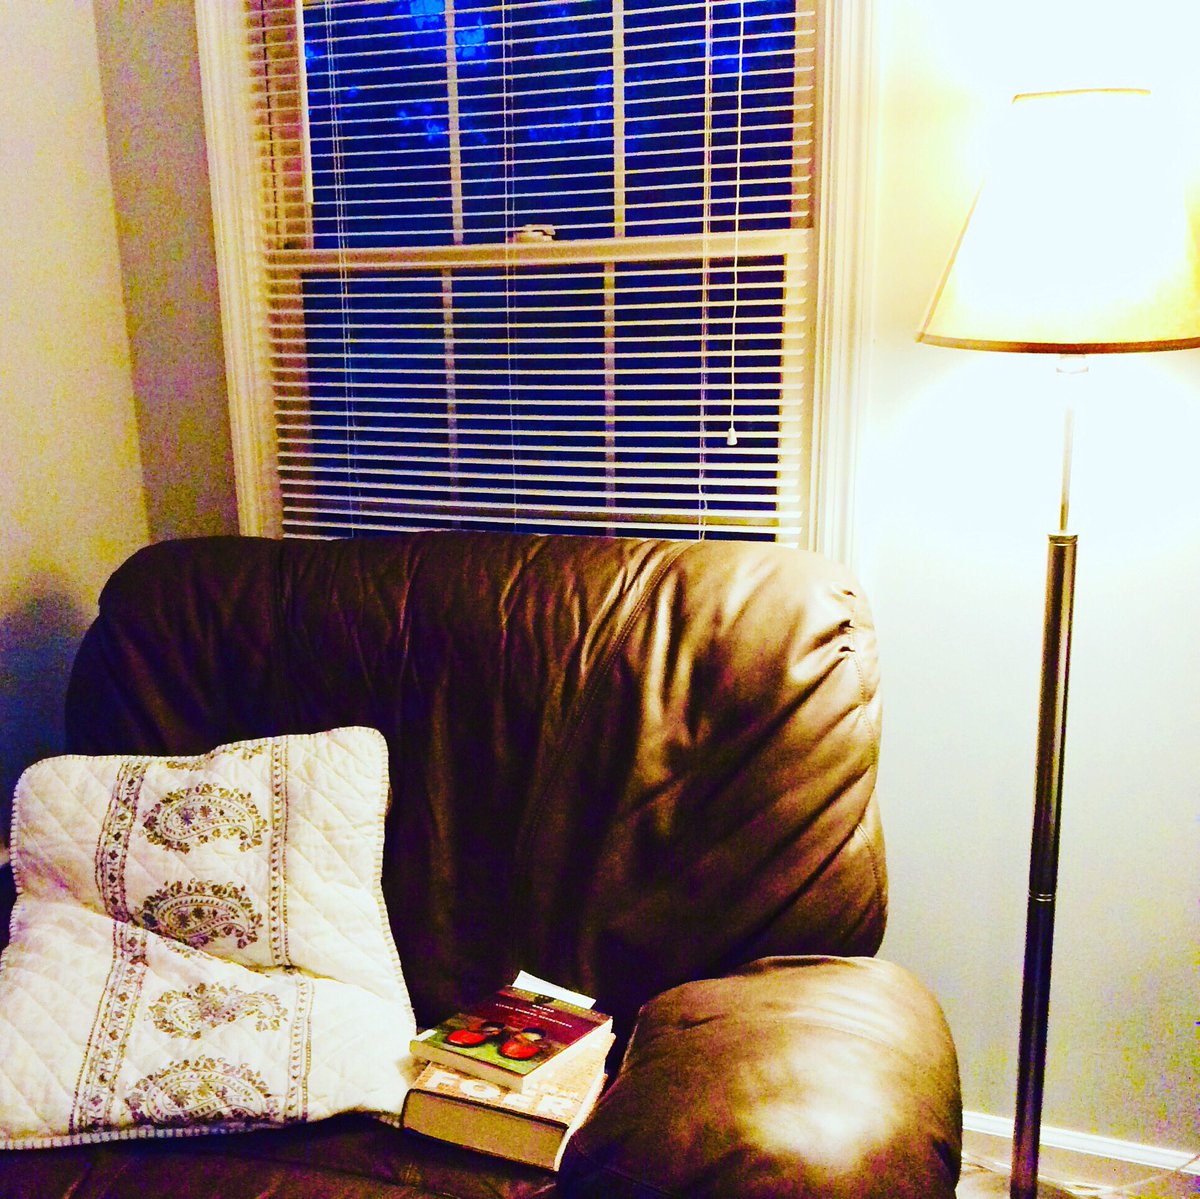 The incomparable warmth of a reading nook 😍😍

#reminiscingthereads